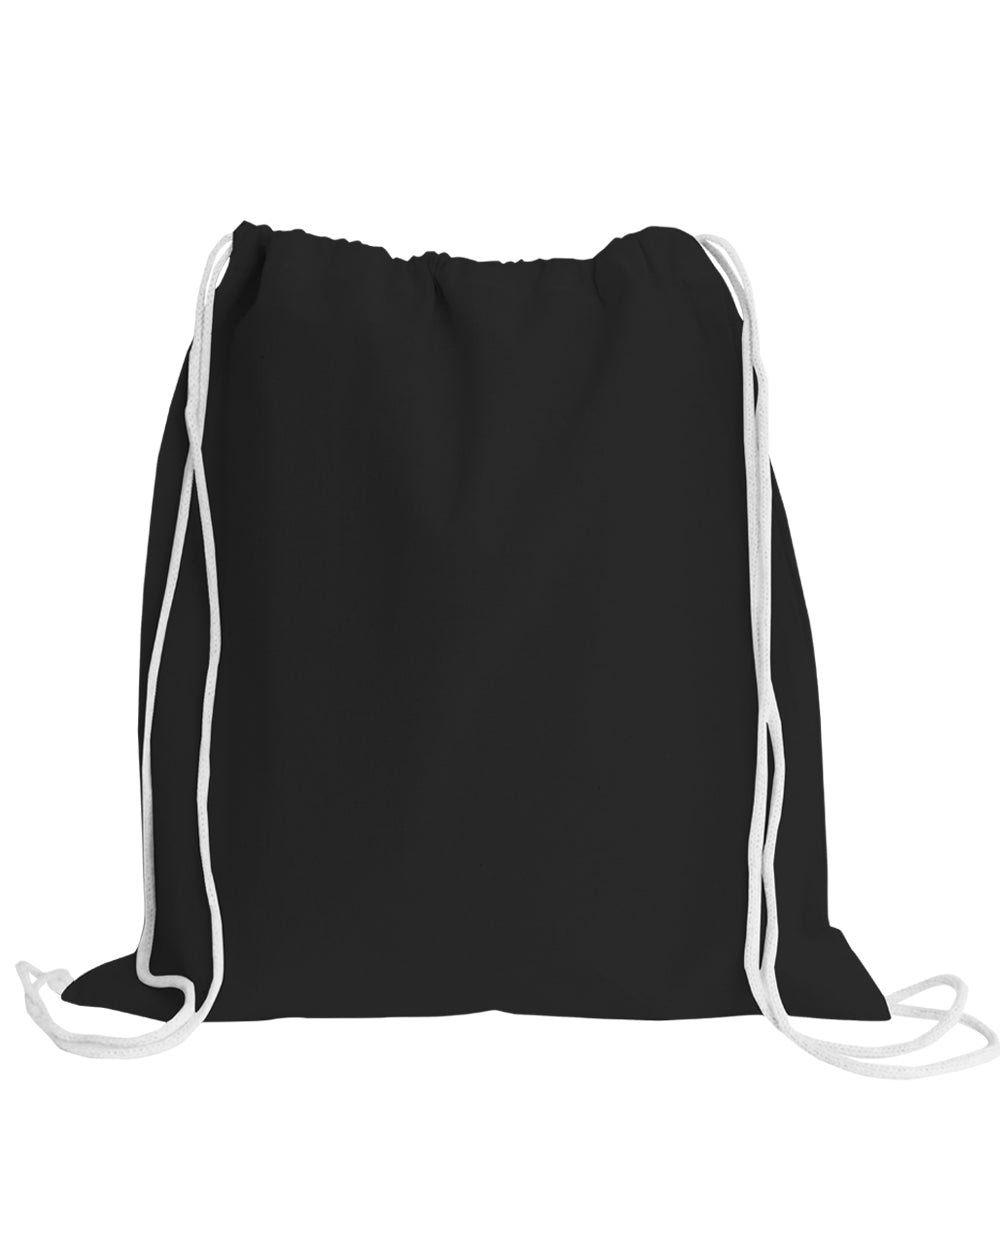 economical promotional small cotton drawstring backpack 